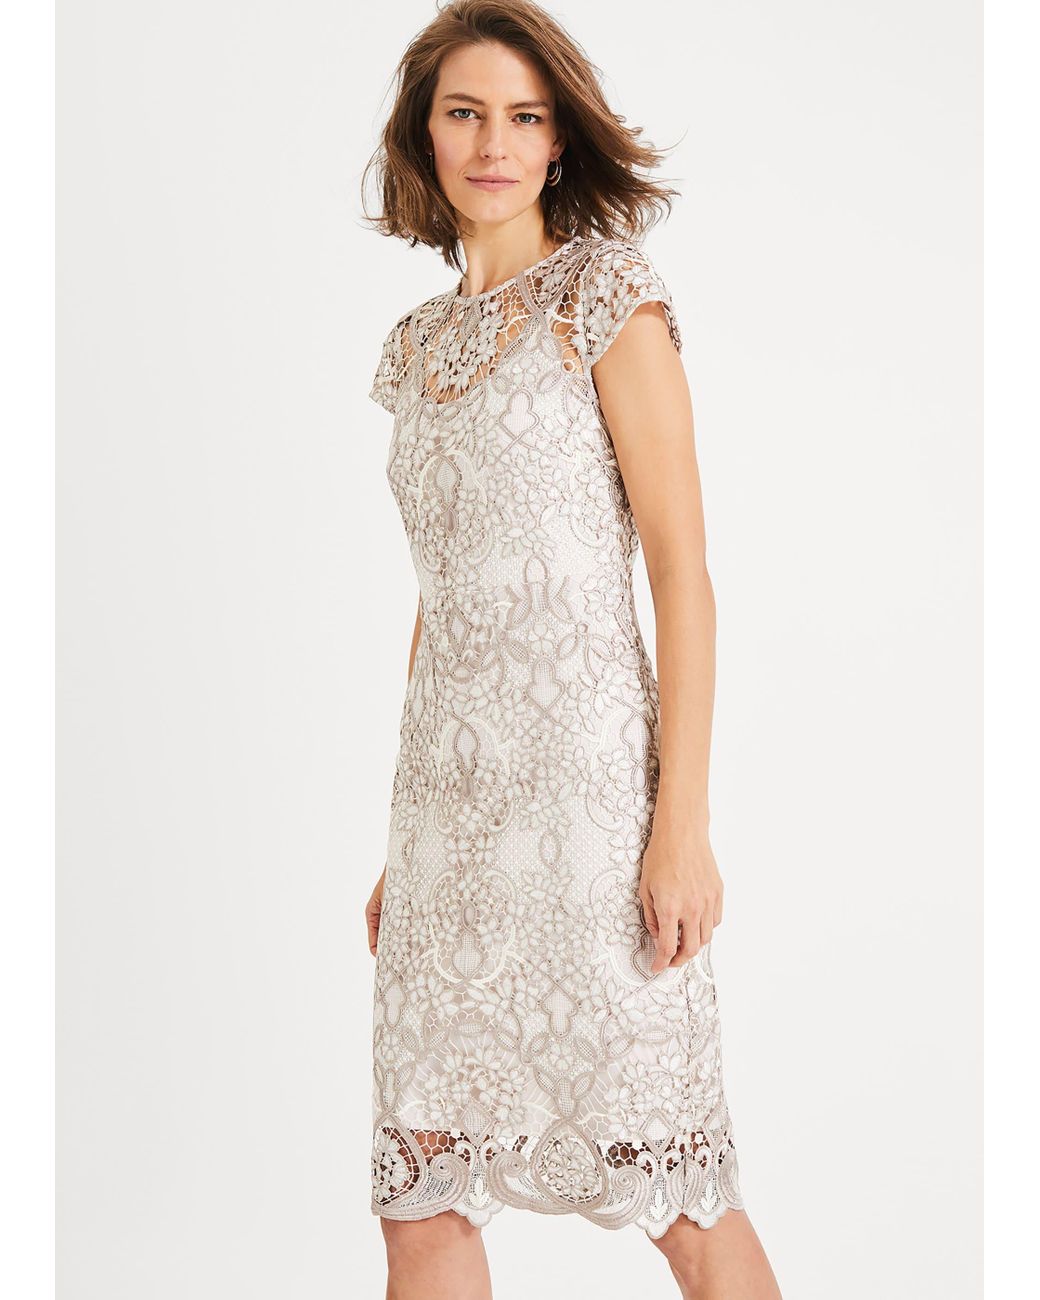 Phase Eight Frances Lace Dress - Lyst